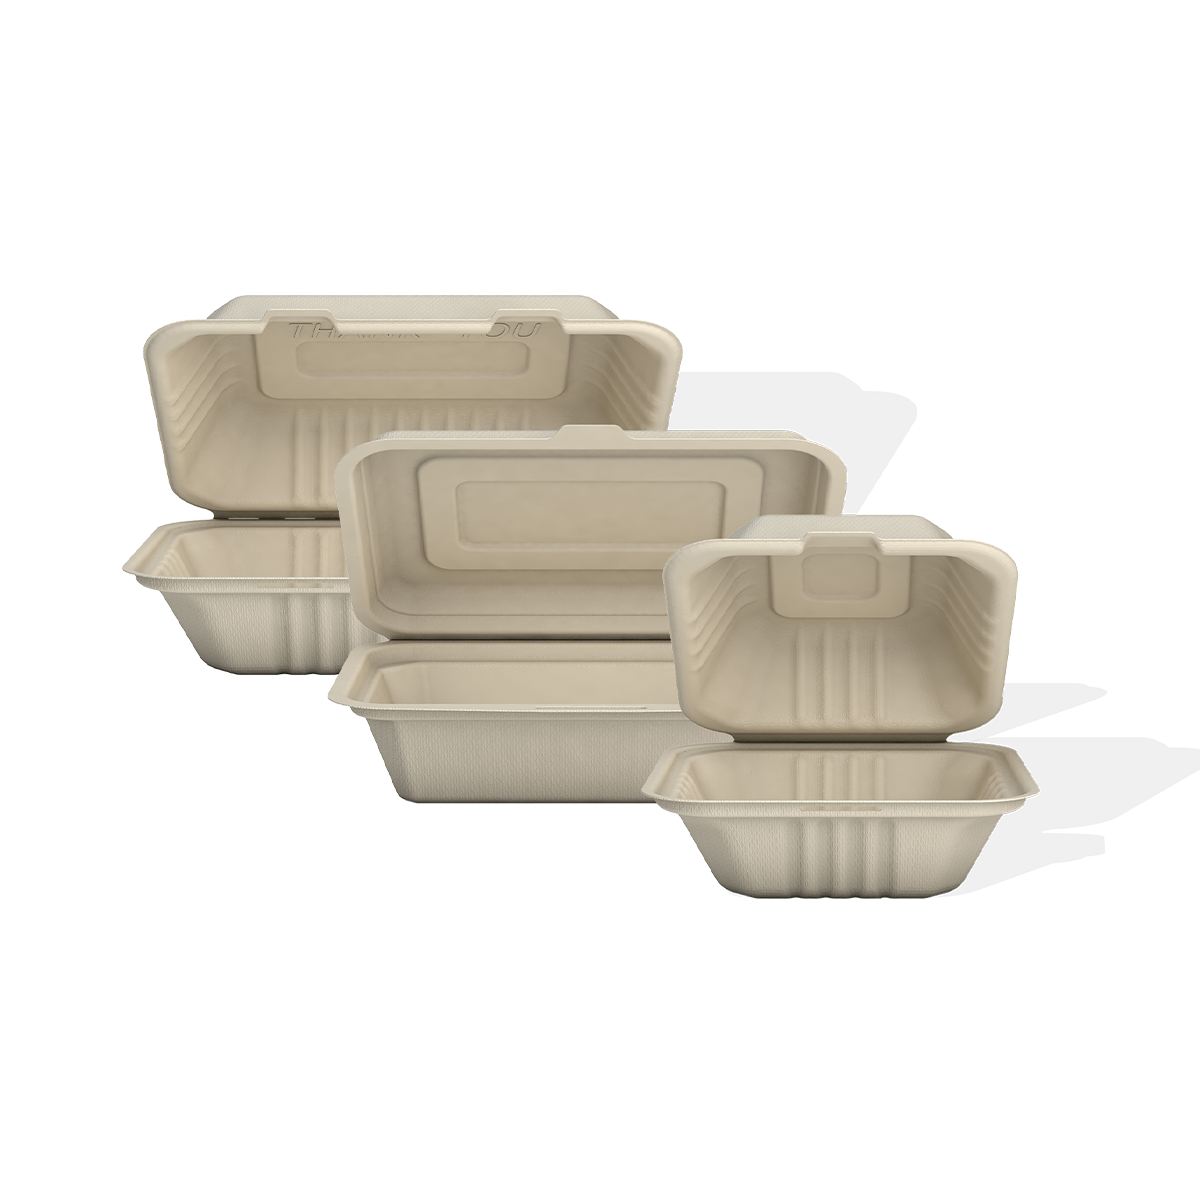 Bagasse clamshell